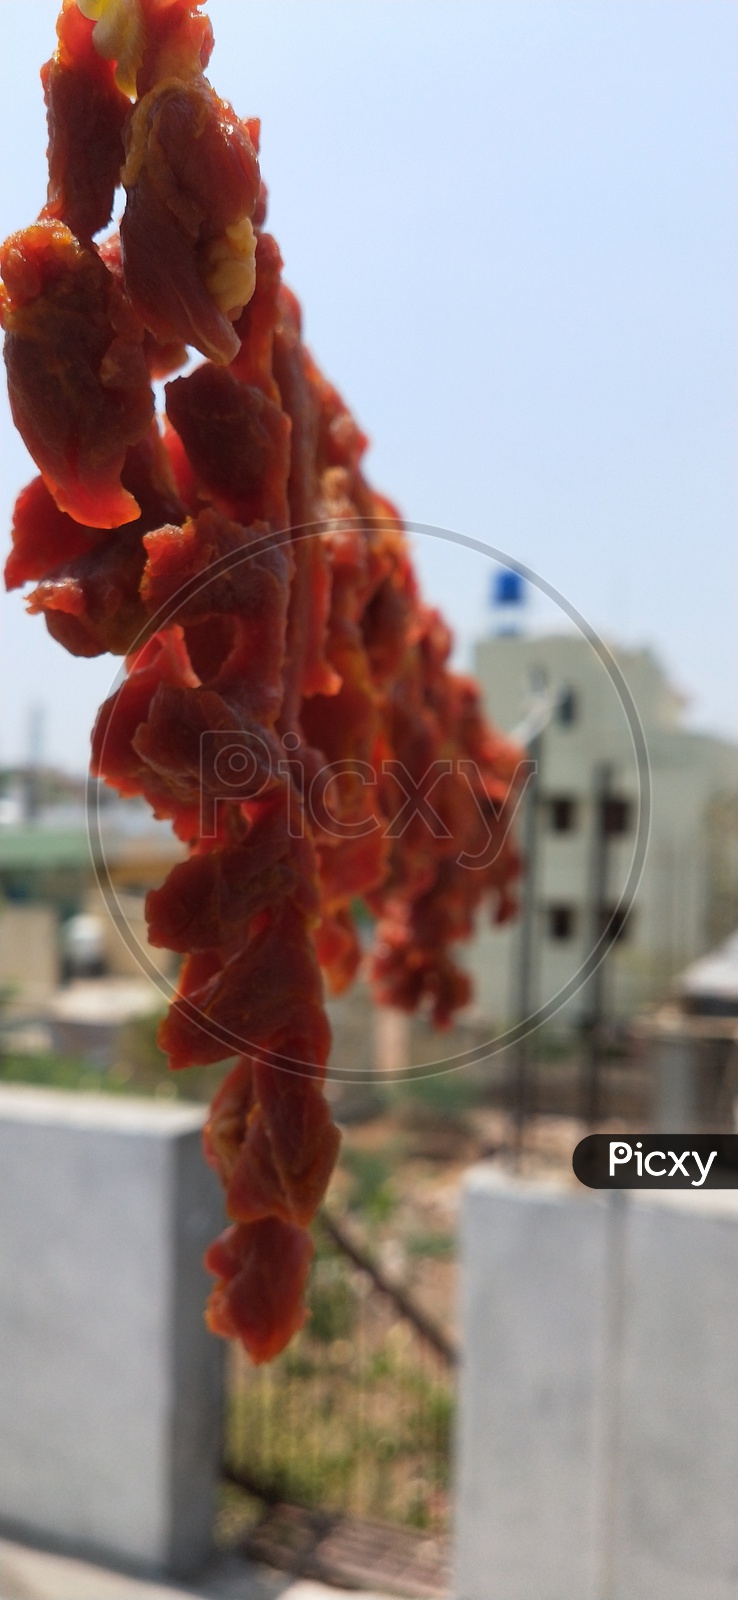 A closer view of fresh mutton piece dried in the hot sun